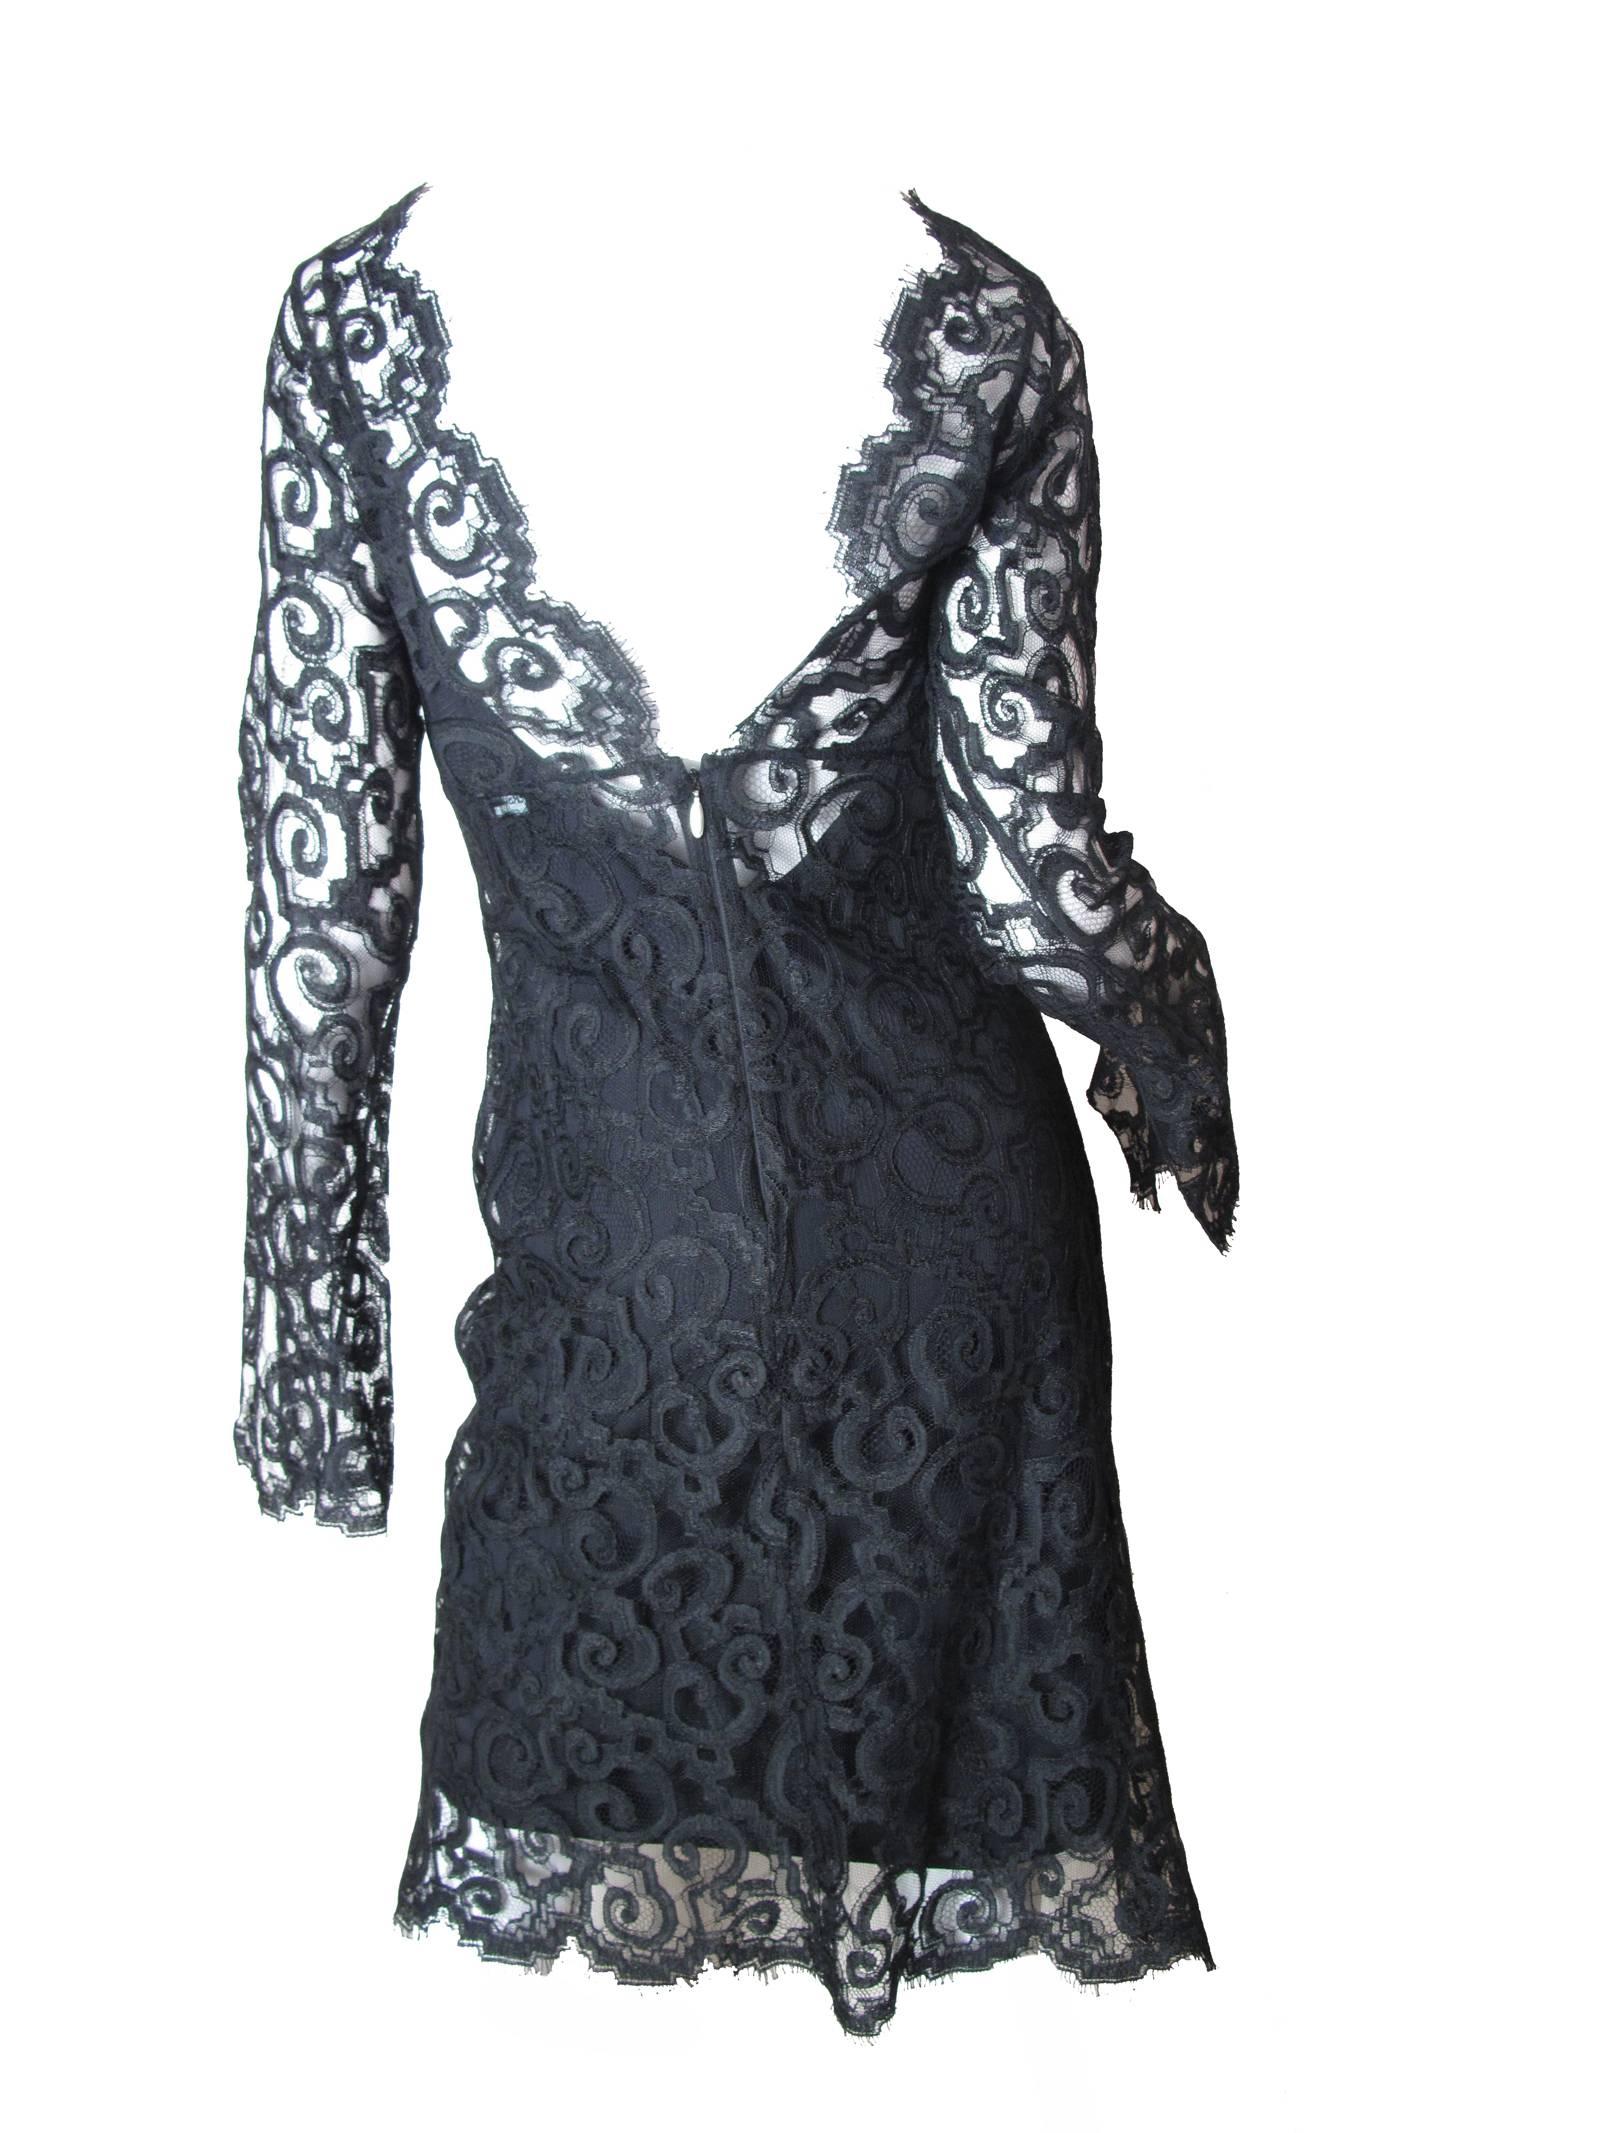 Versus black lace cocktail dress.  Condition: Excellent.  Size 8

We accept returns for refund, please see our terms.  We offer free ground shipping within the US.  Please let us know if you have any questions. 
